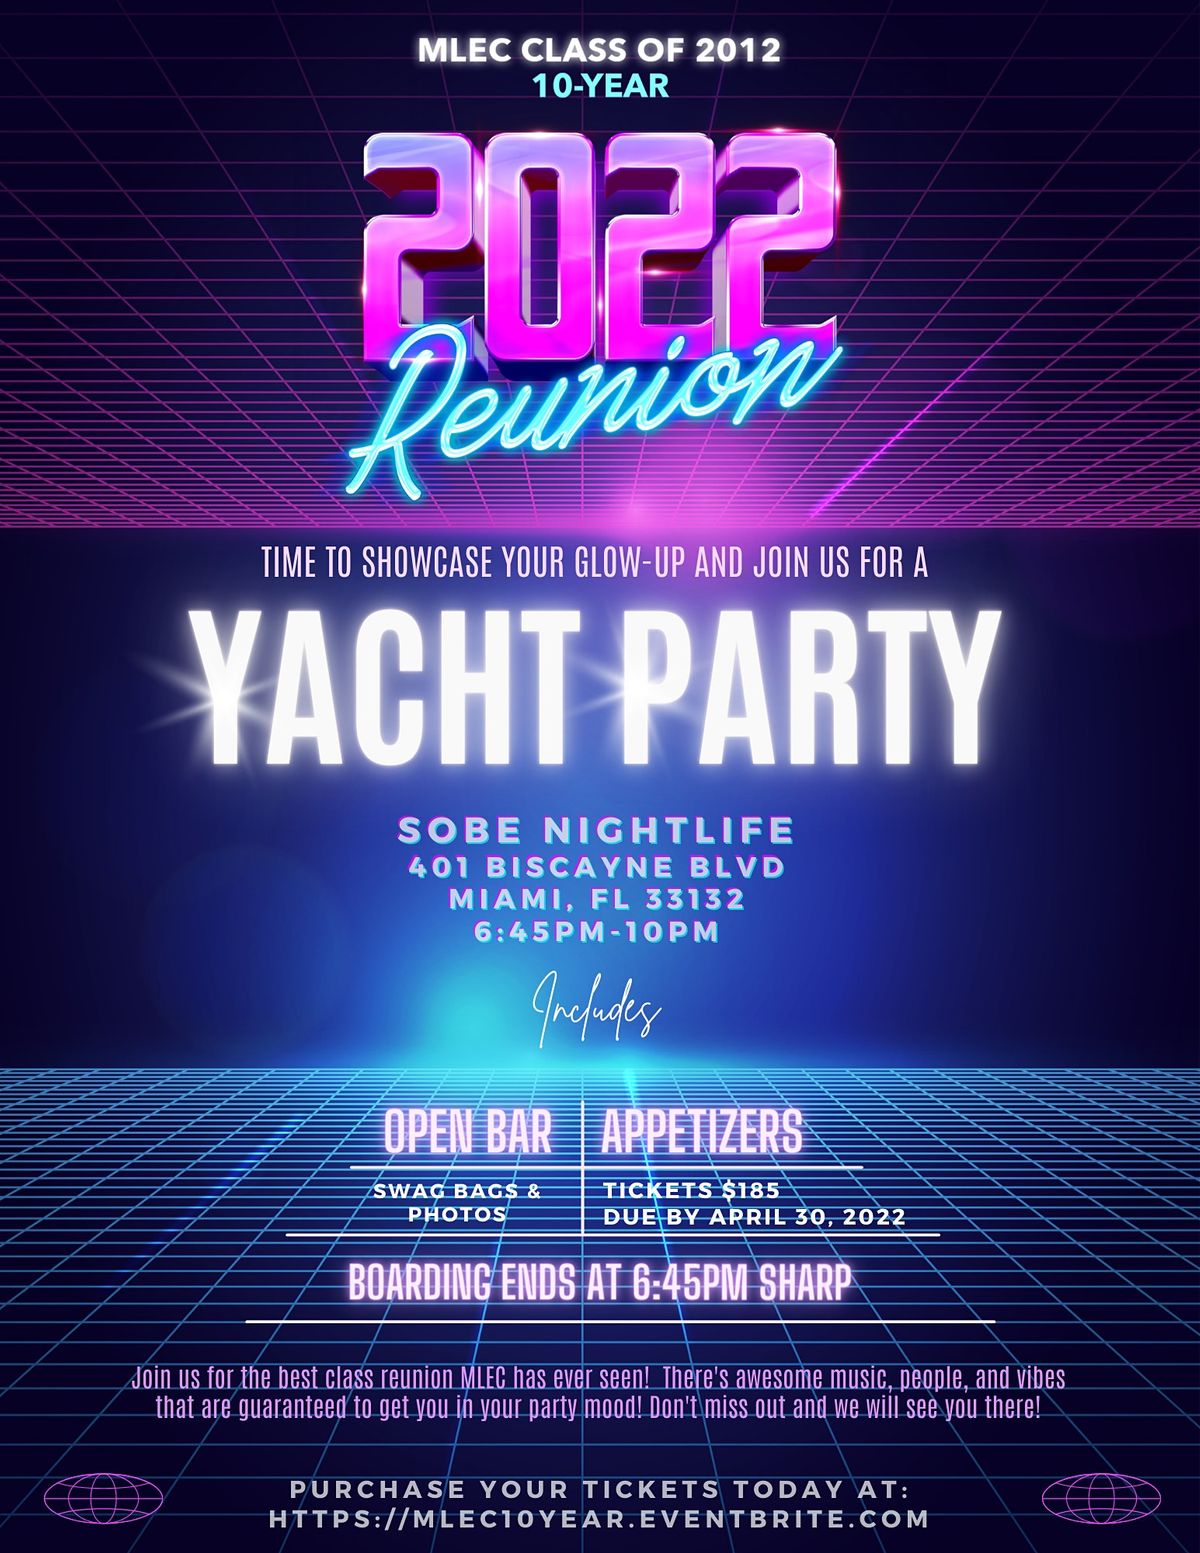 YACHT PARTY | MLEC C\/O 2012 10 YEAR REUNION